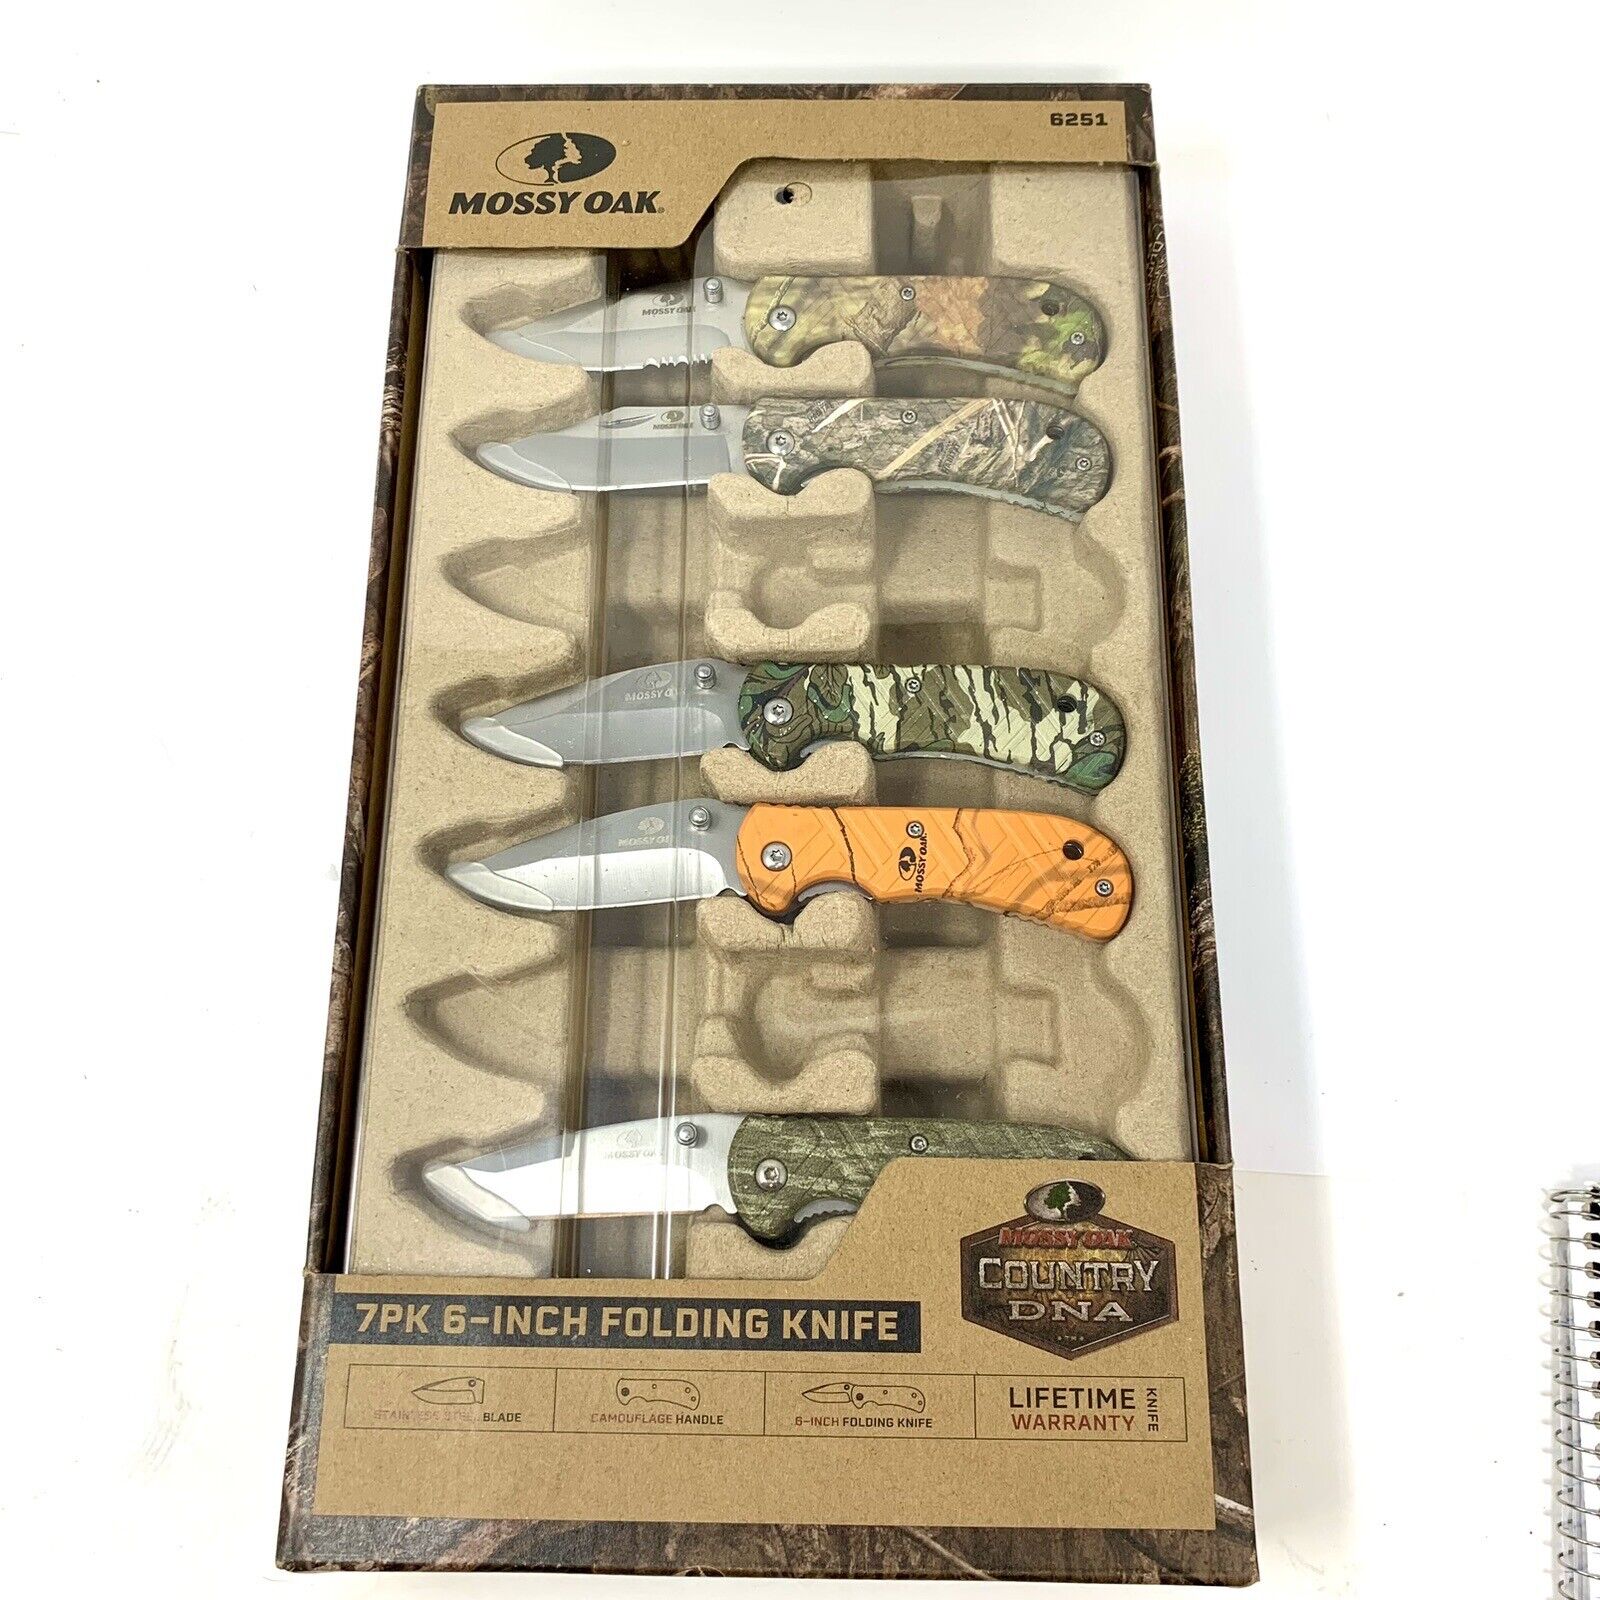 Mossy Oak 5 Pack 6” Folding Knives Country DNA Set New In Box Camouflage Handles